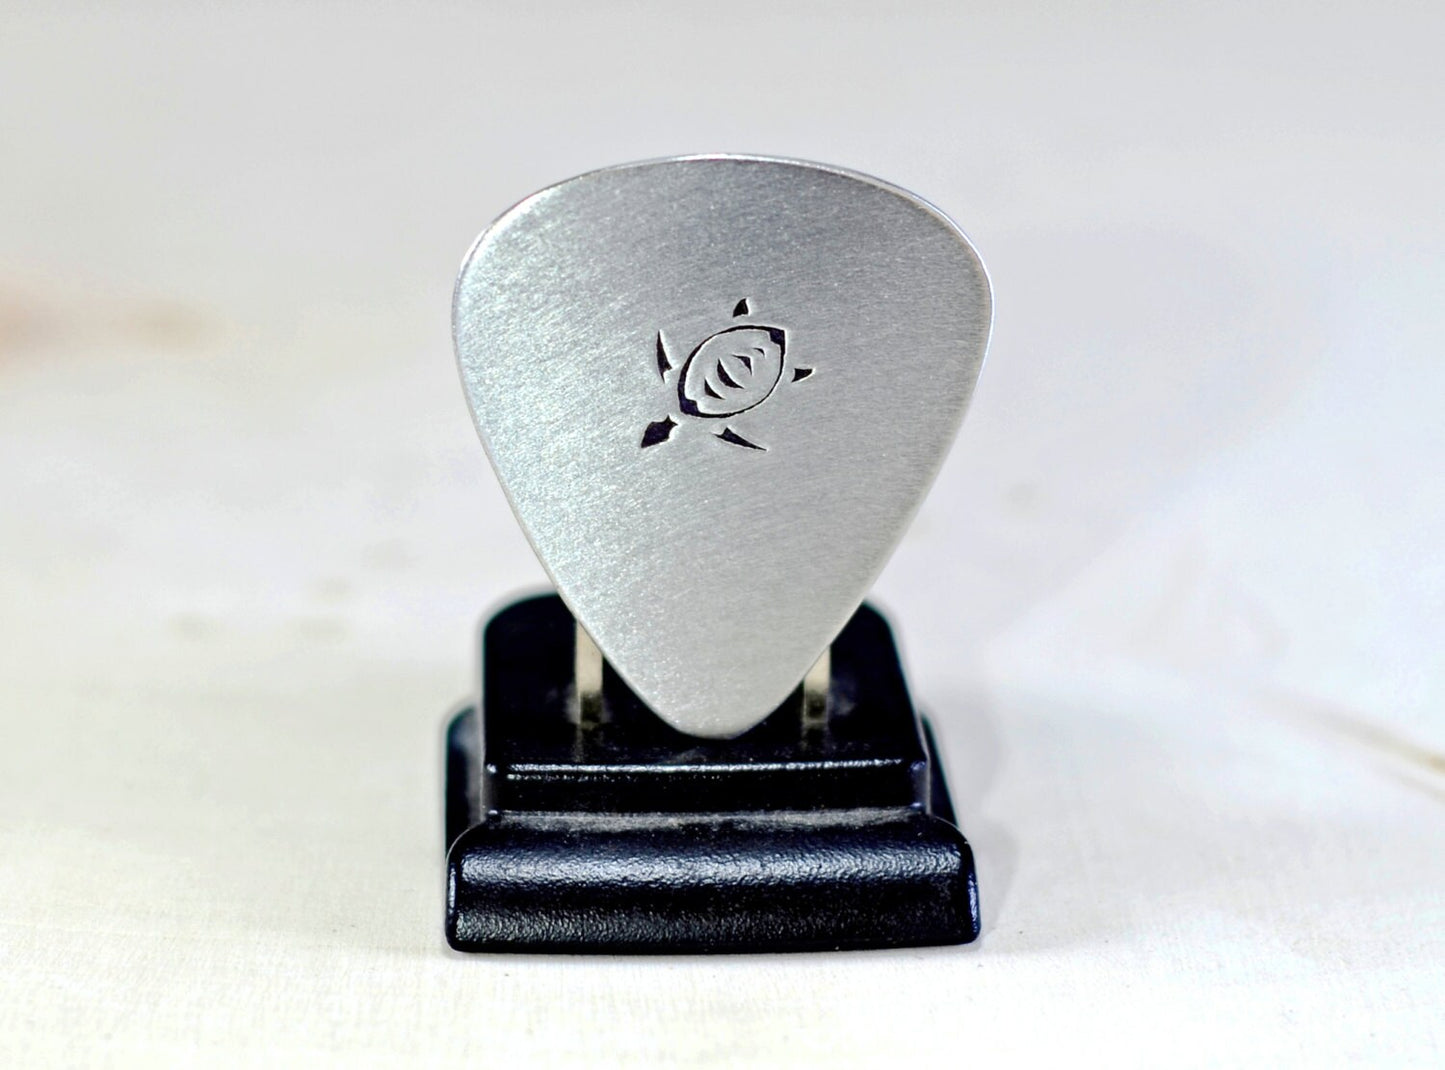 Sea turtle aluminum guitar pick handmade in aluminum for peace and tranquility in your music